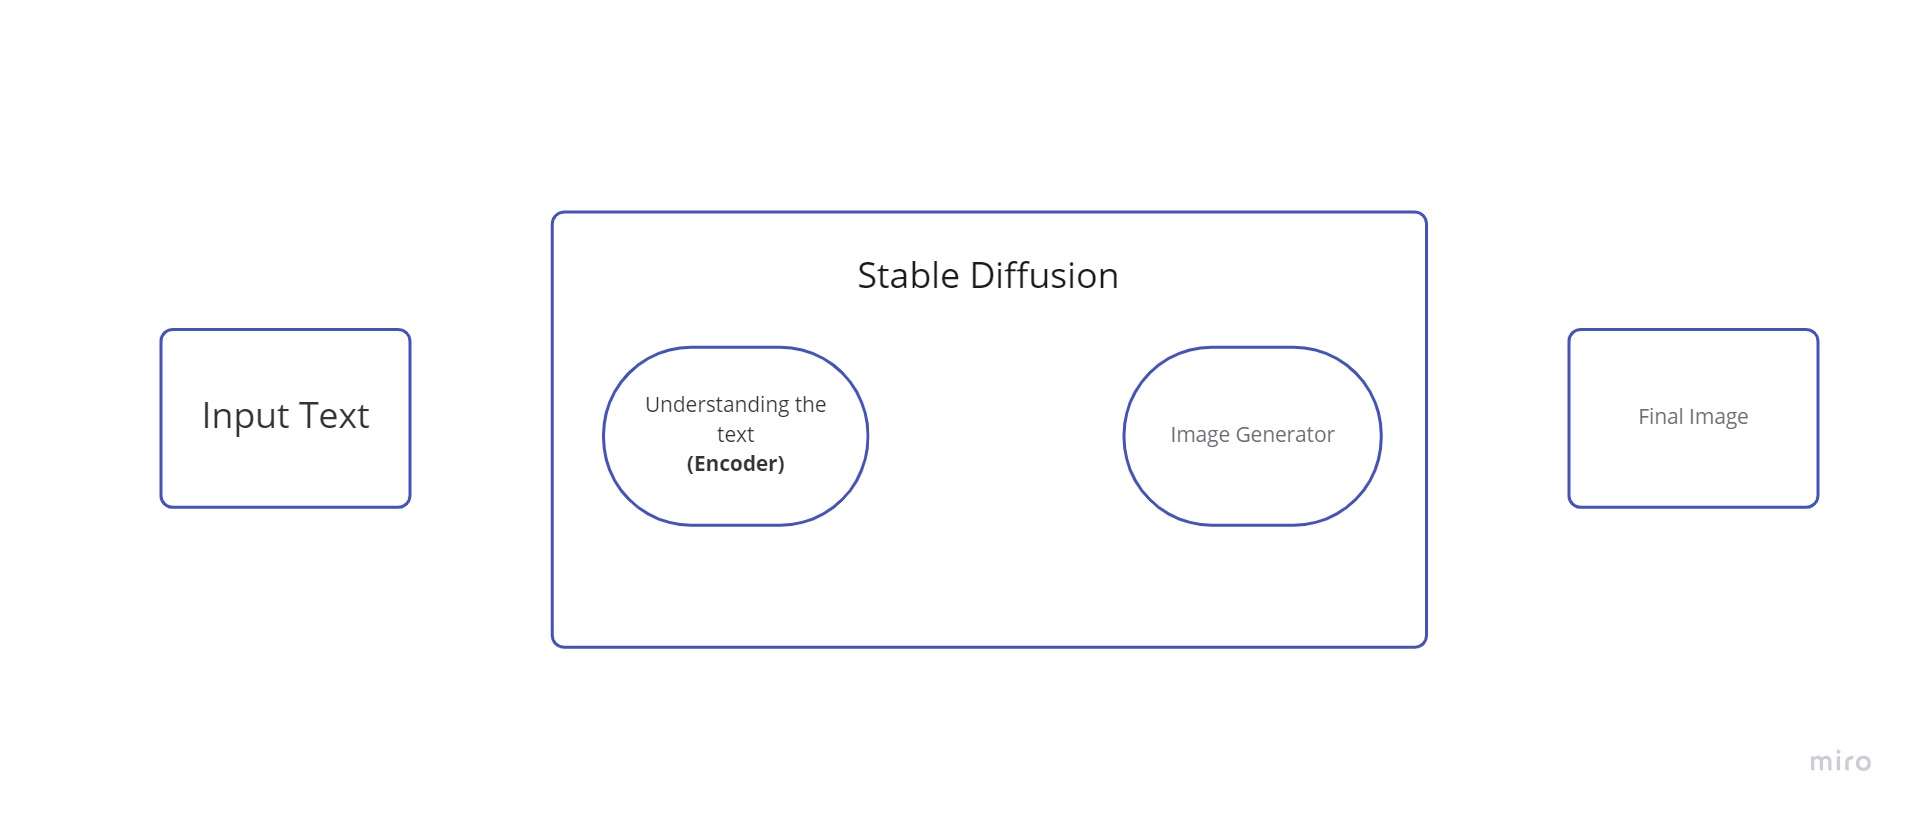 Stable Diffusion Overview